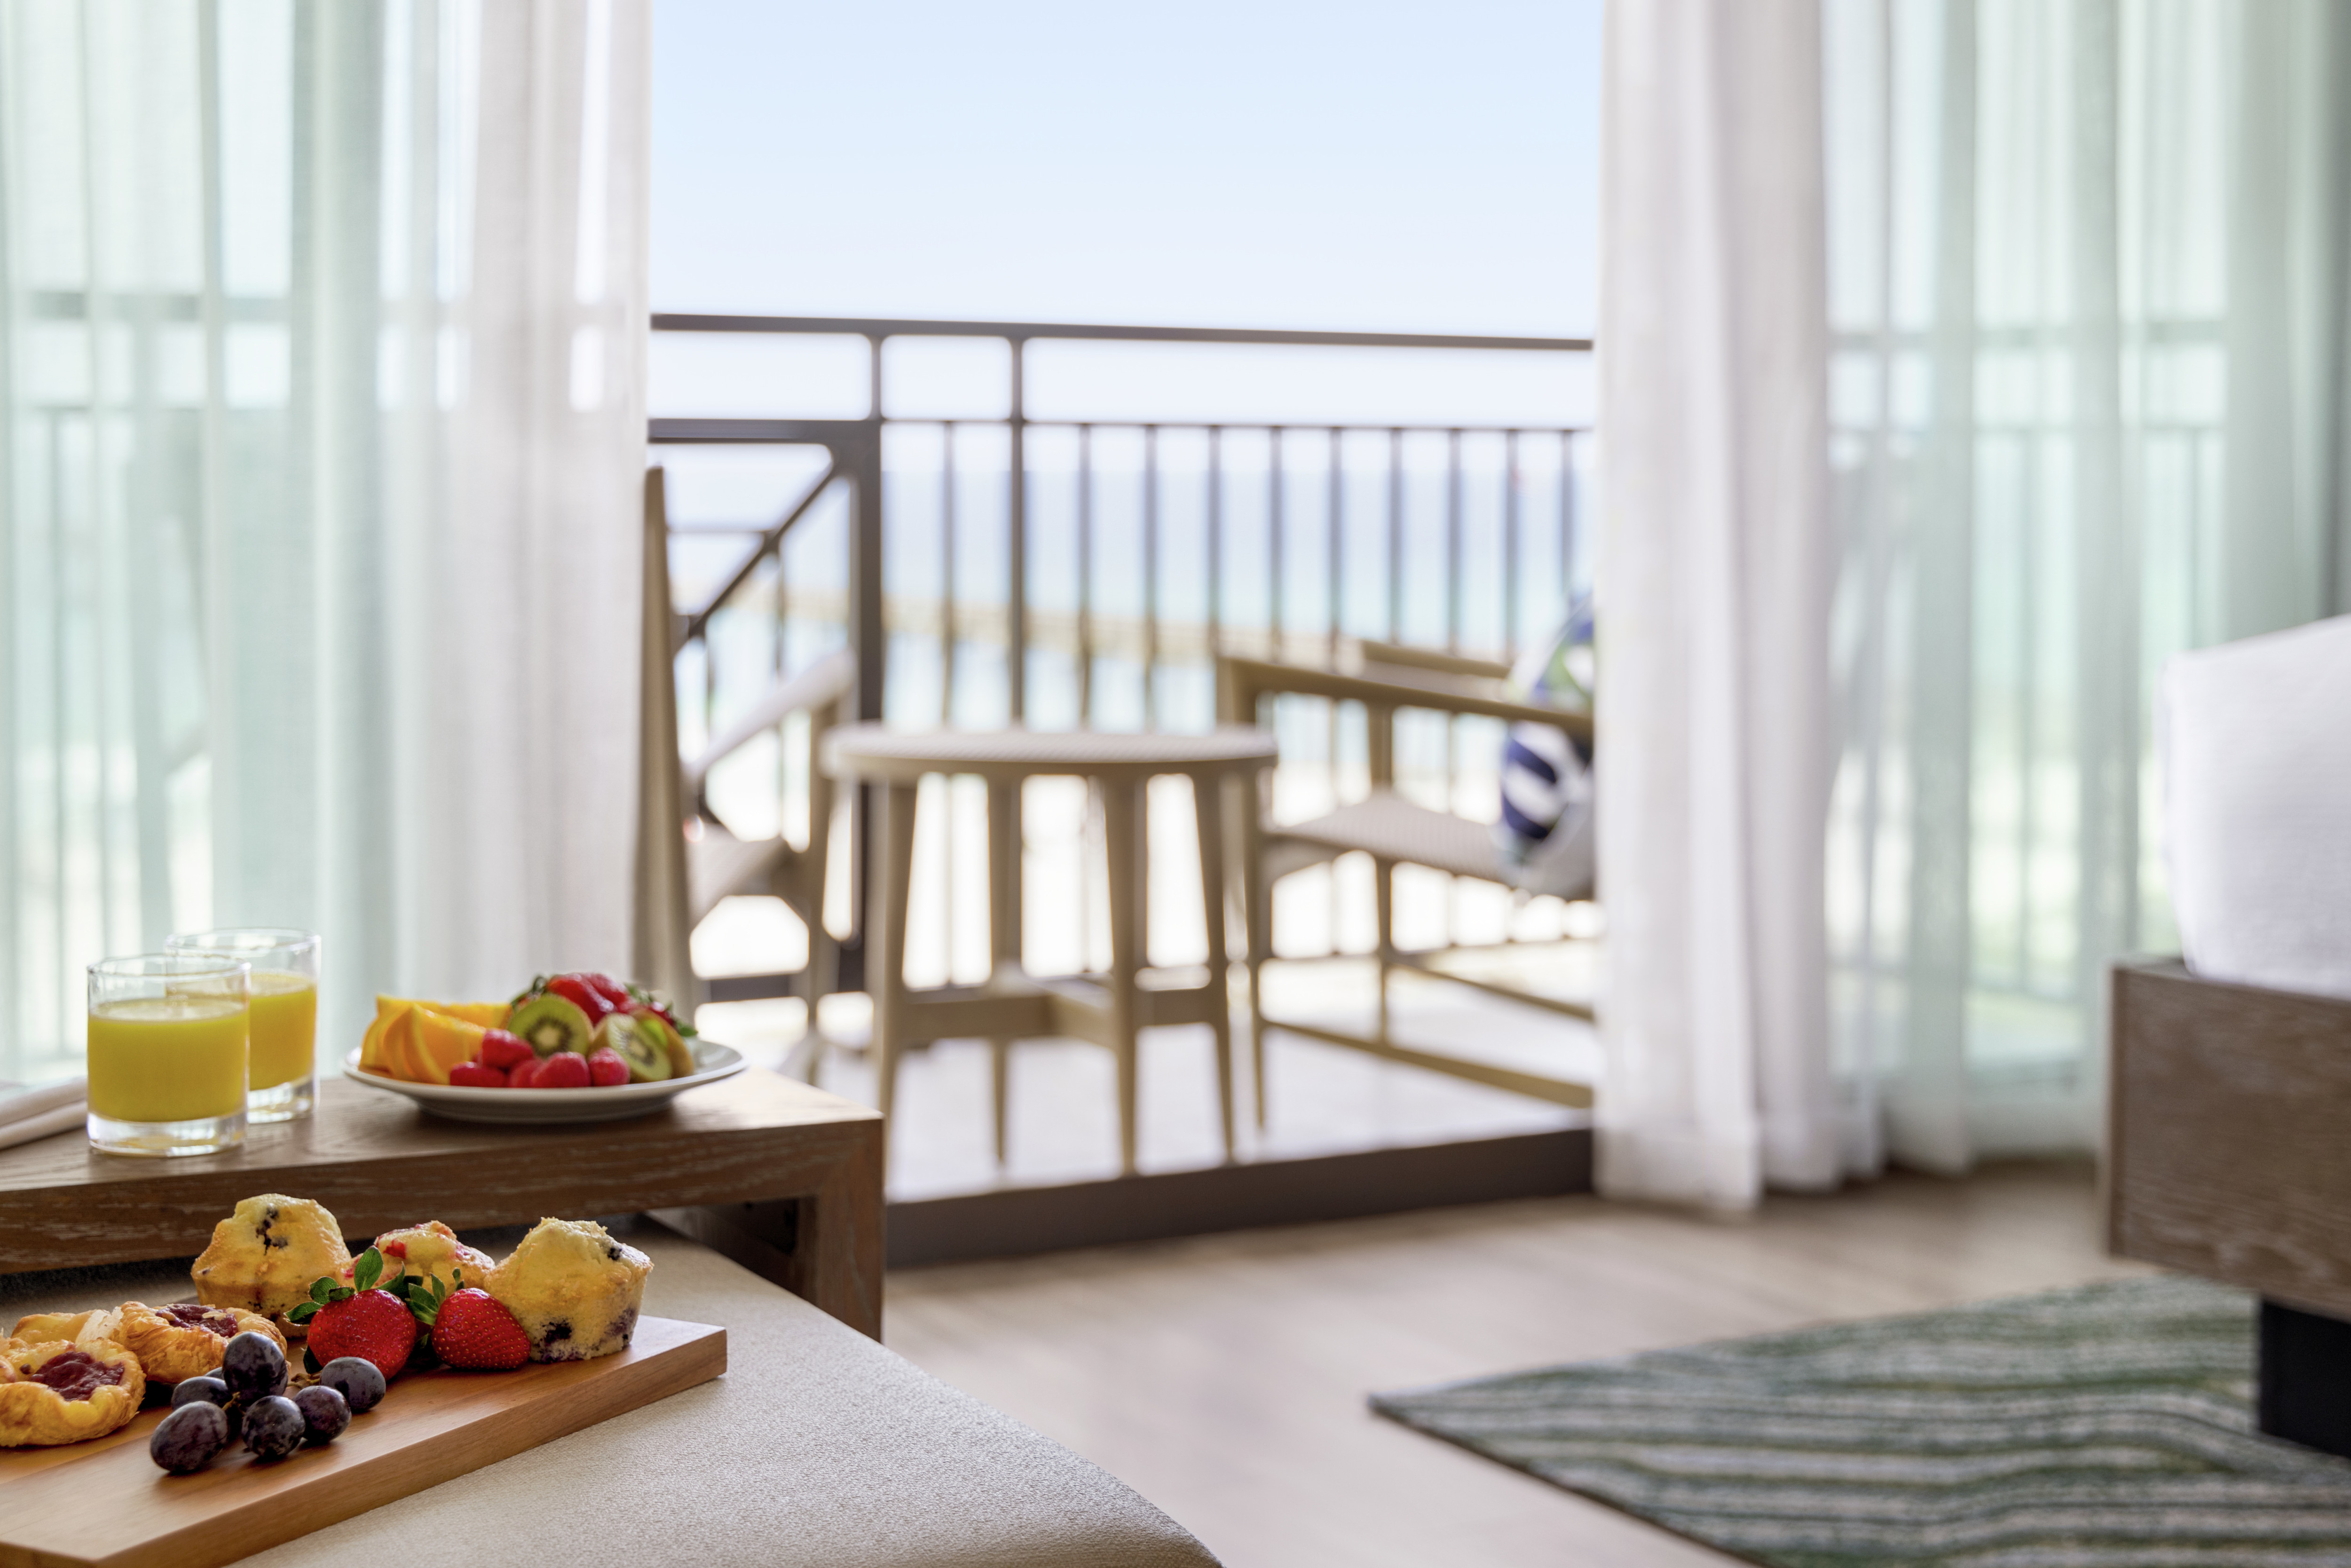 Inviting morning breakfast set up leading out to balcony seating and ocean views